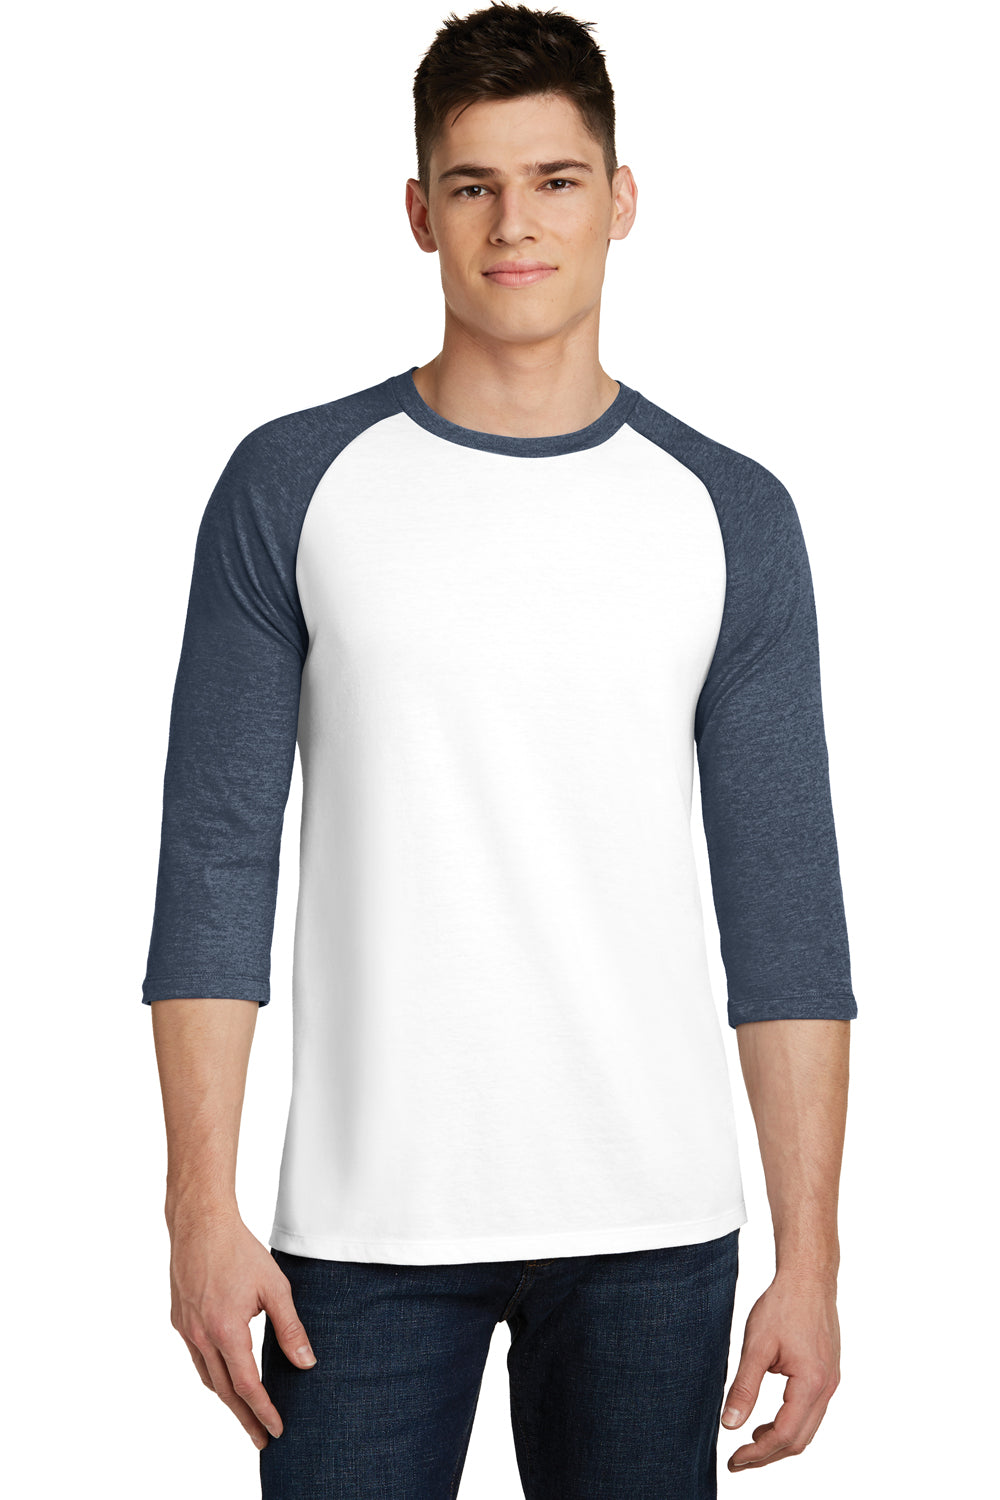 District DT6210 Mens Very Important 3/4 Sleeve Crewneck T-Shirt White/Heather Navy Blue Front